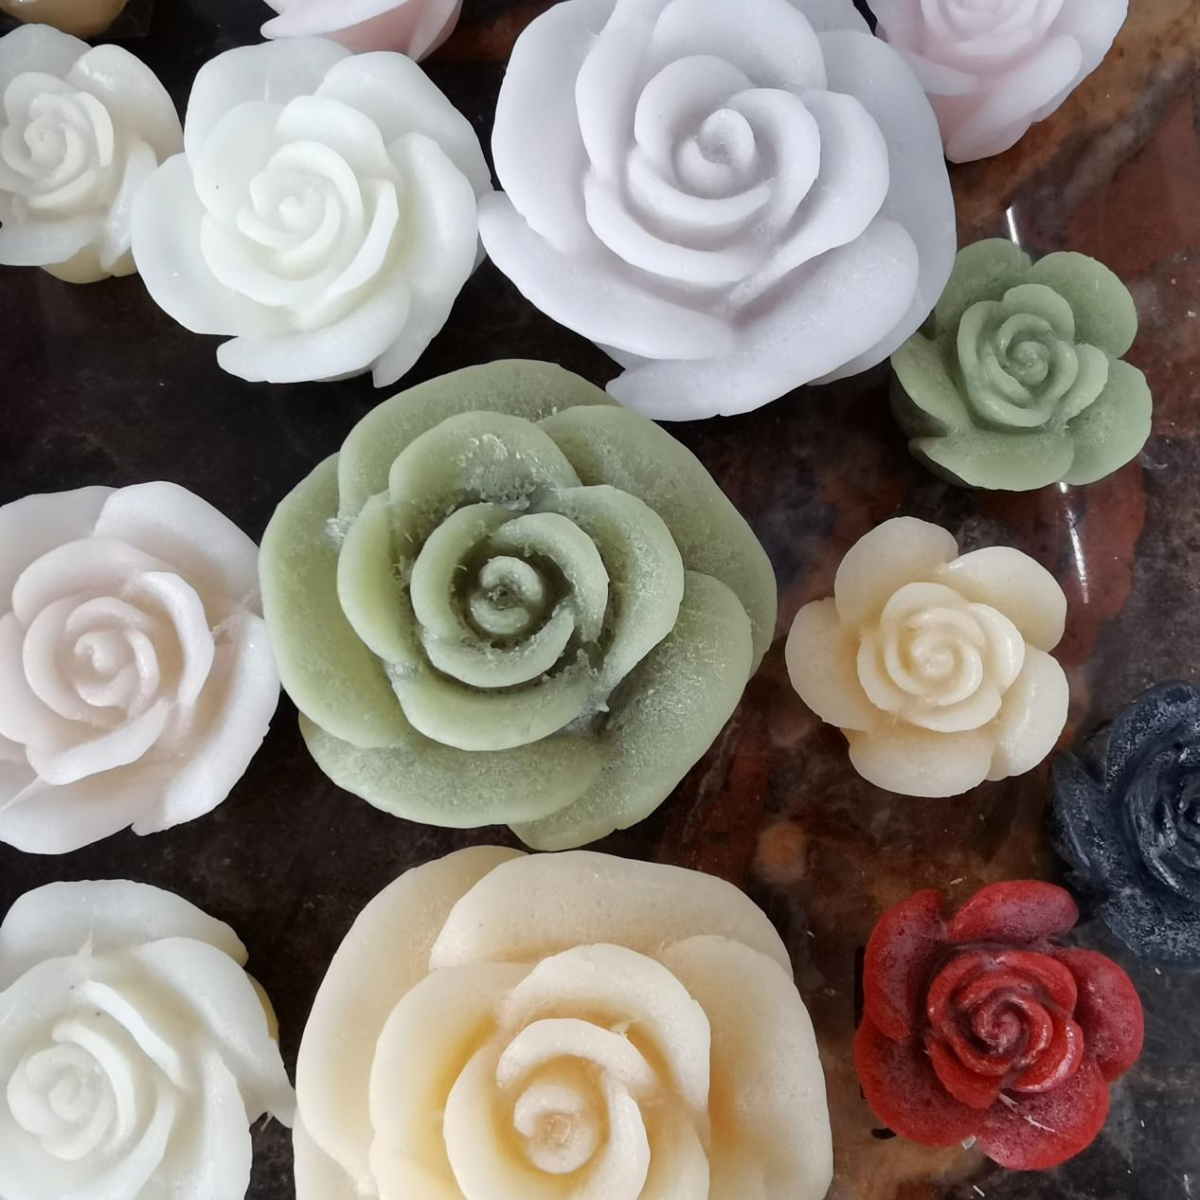 Scented Candles -Rose Shaped Flower Candles ,Beeswax Candles ,China Factory ,Price-HOWCANDLE-Candles,Scented Candles,Aromatherapy Candles,Soy Candles,Vegan Candles,Jar Candles,Pillar Candles,Candle Gift Sets,Essential Oils,Reed Diffuser,Candle Holder,